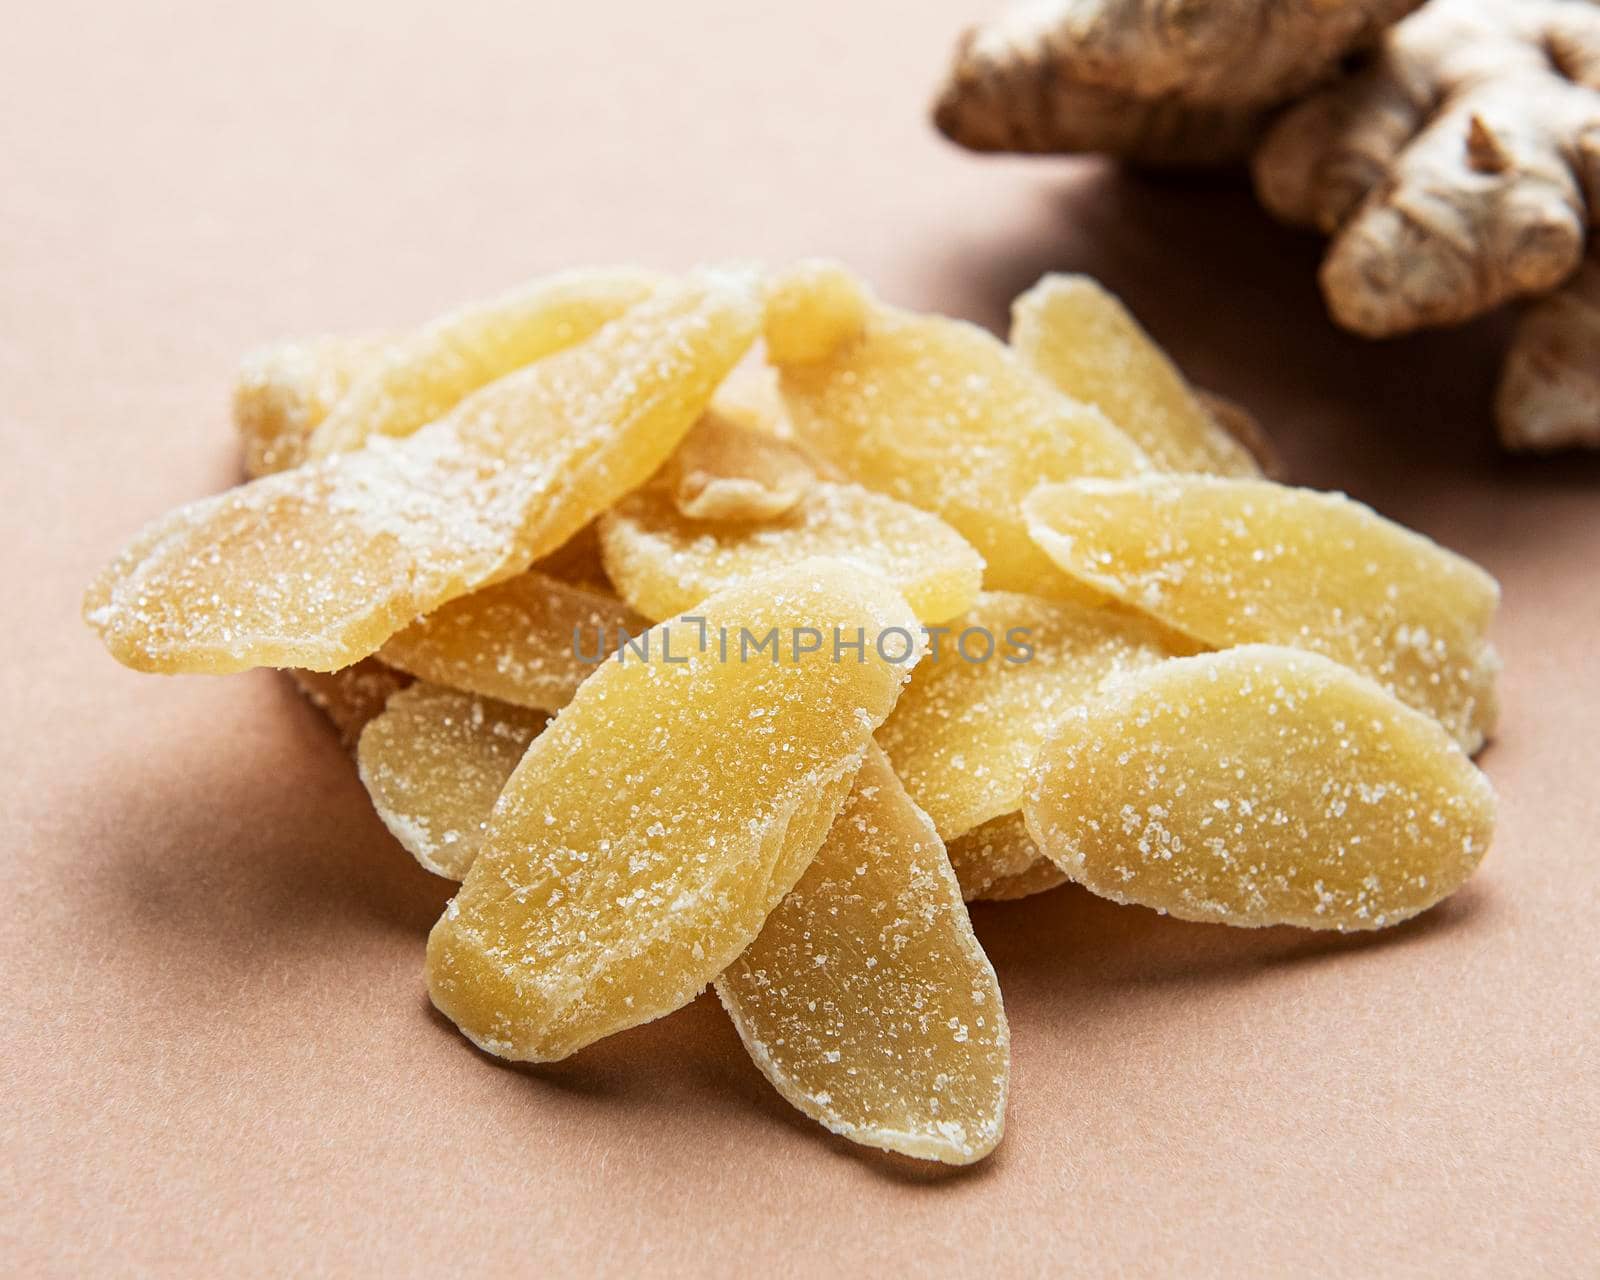 Sweet and spicy candied ginger by Almaje